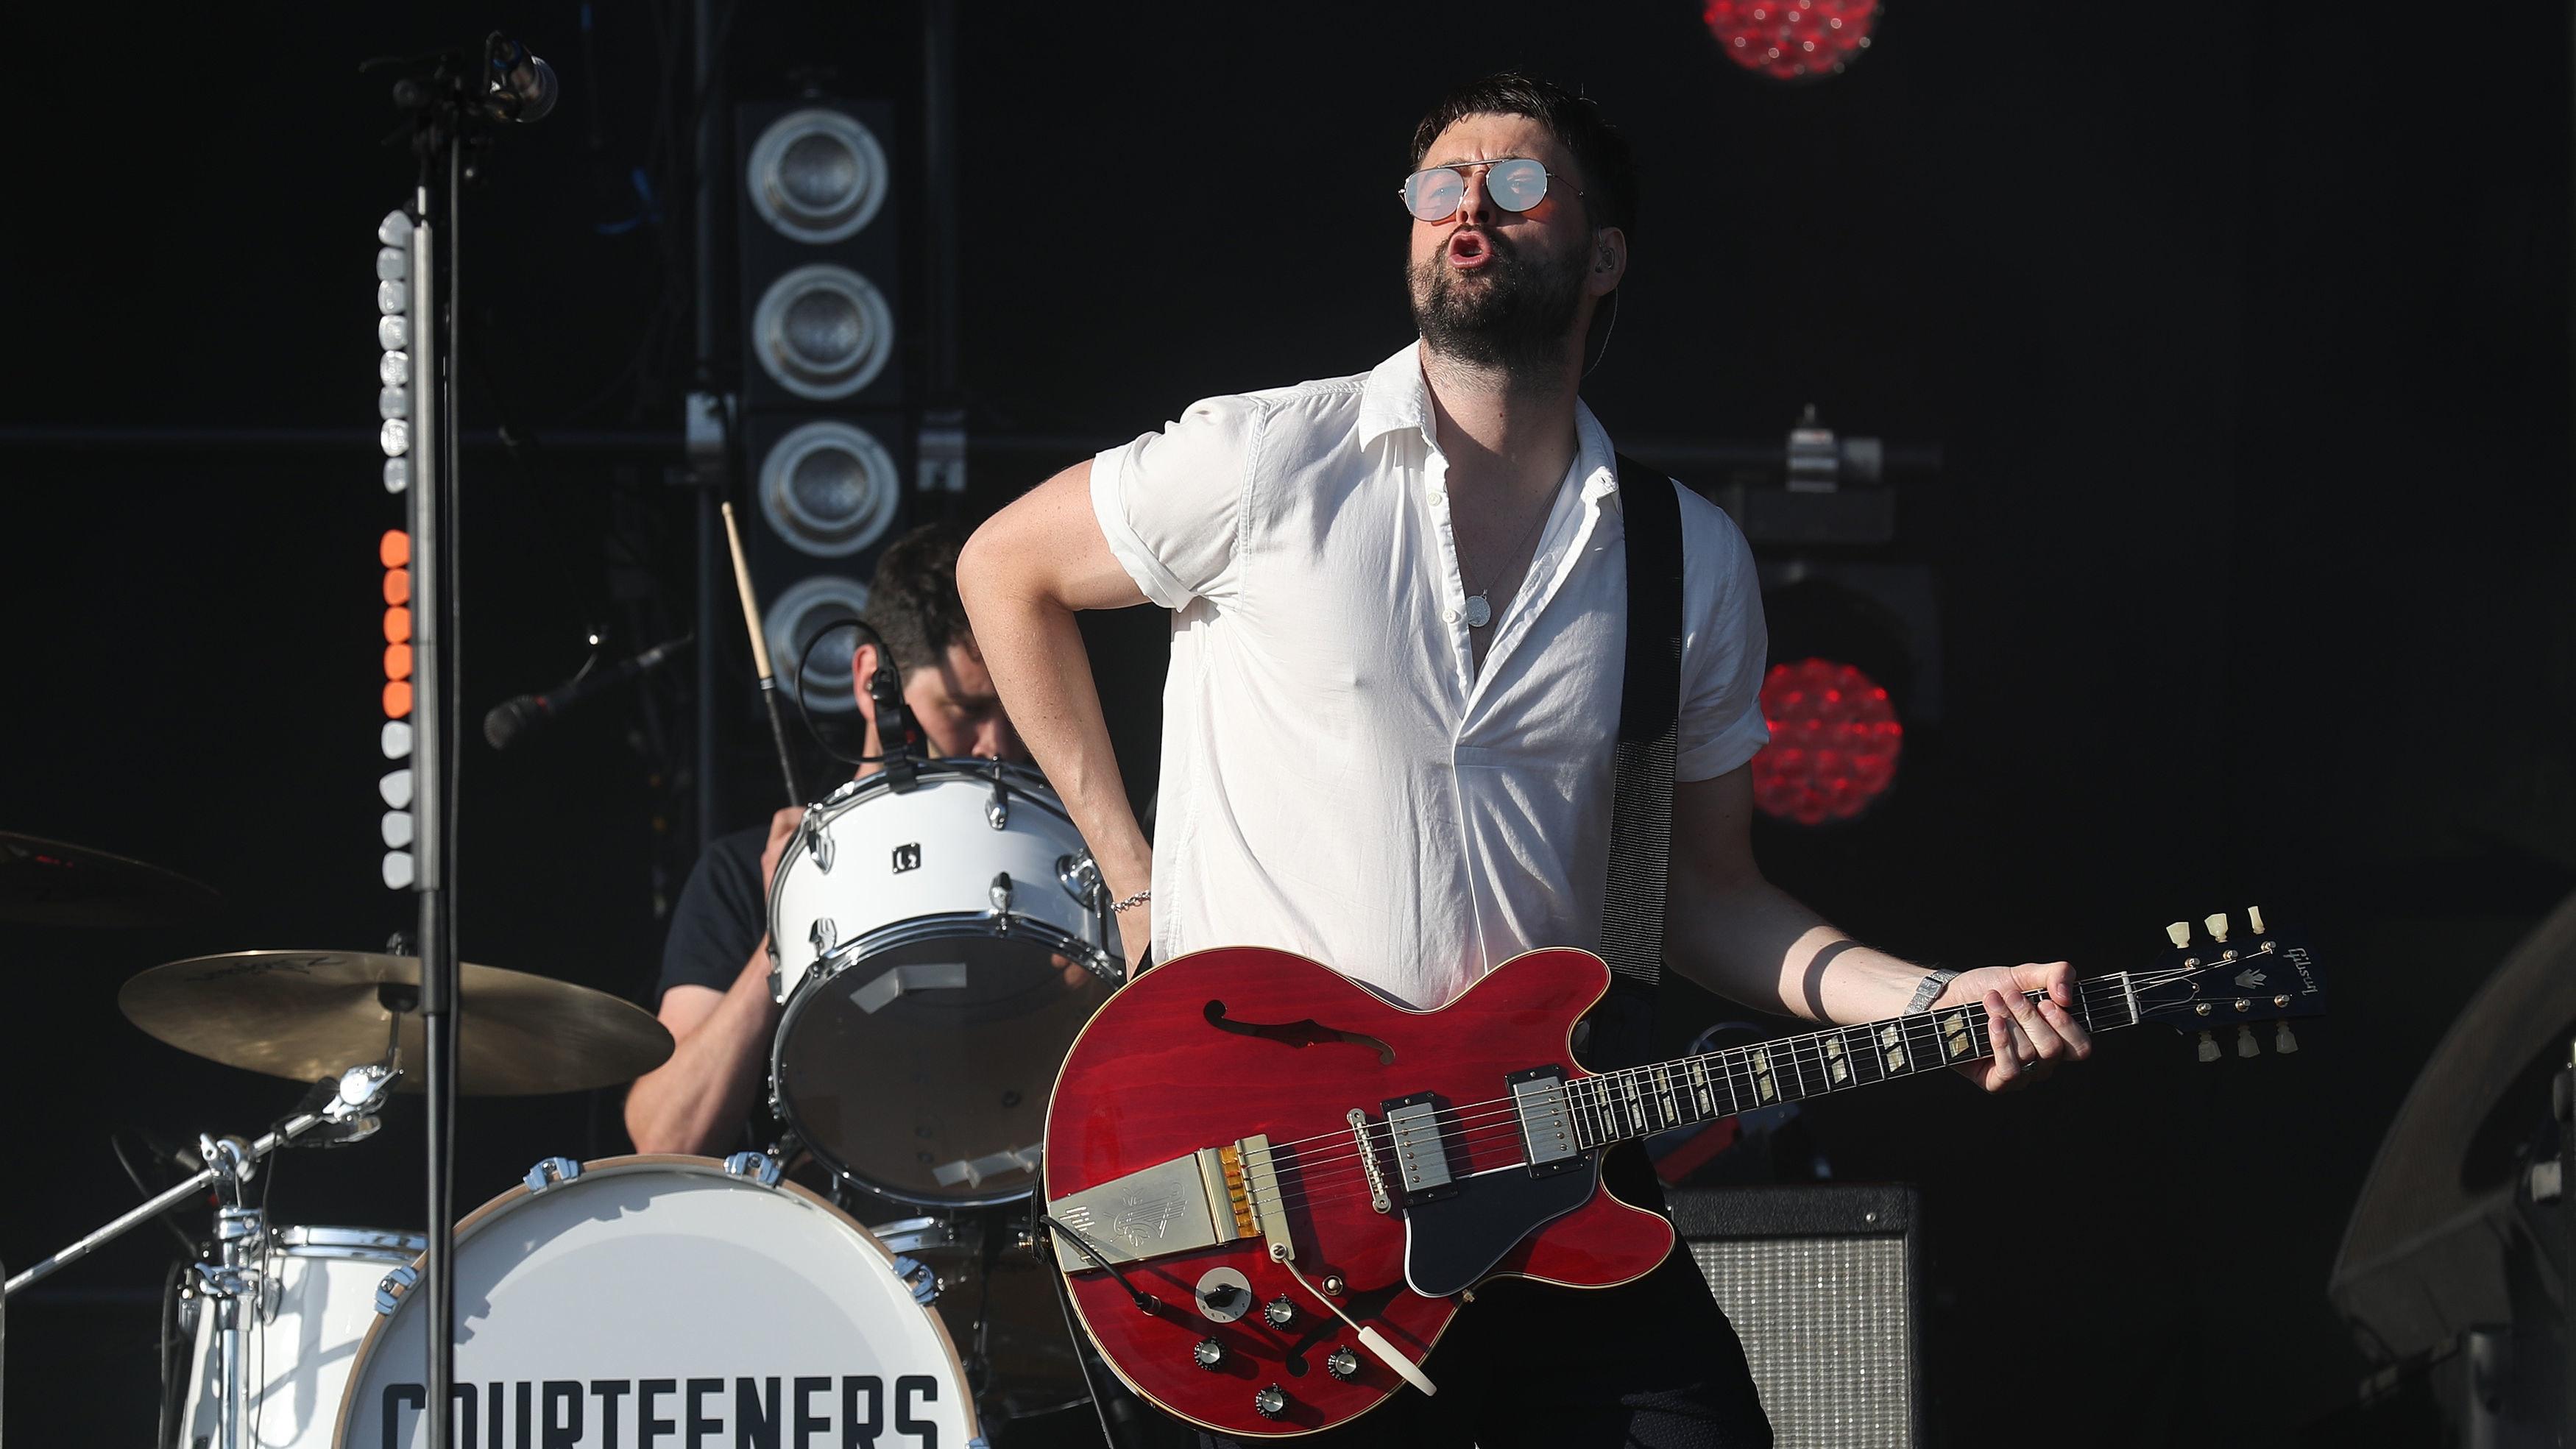 Courteeners on course to rob Eminem of number one album